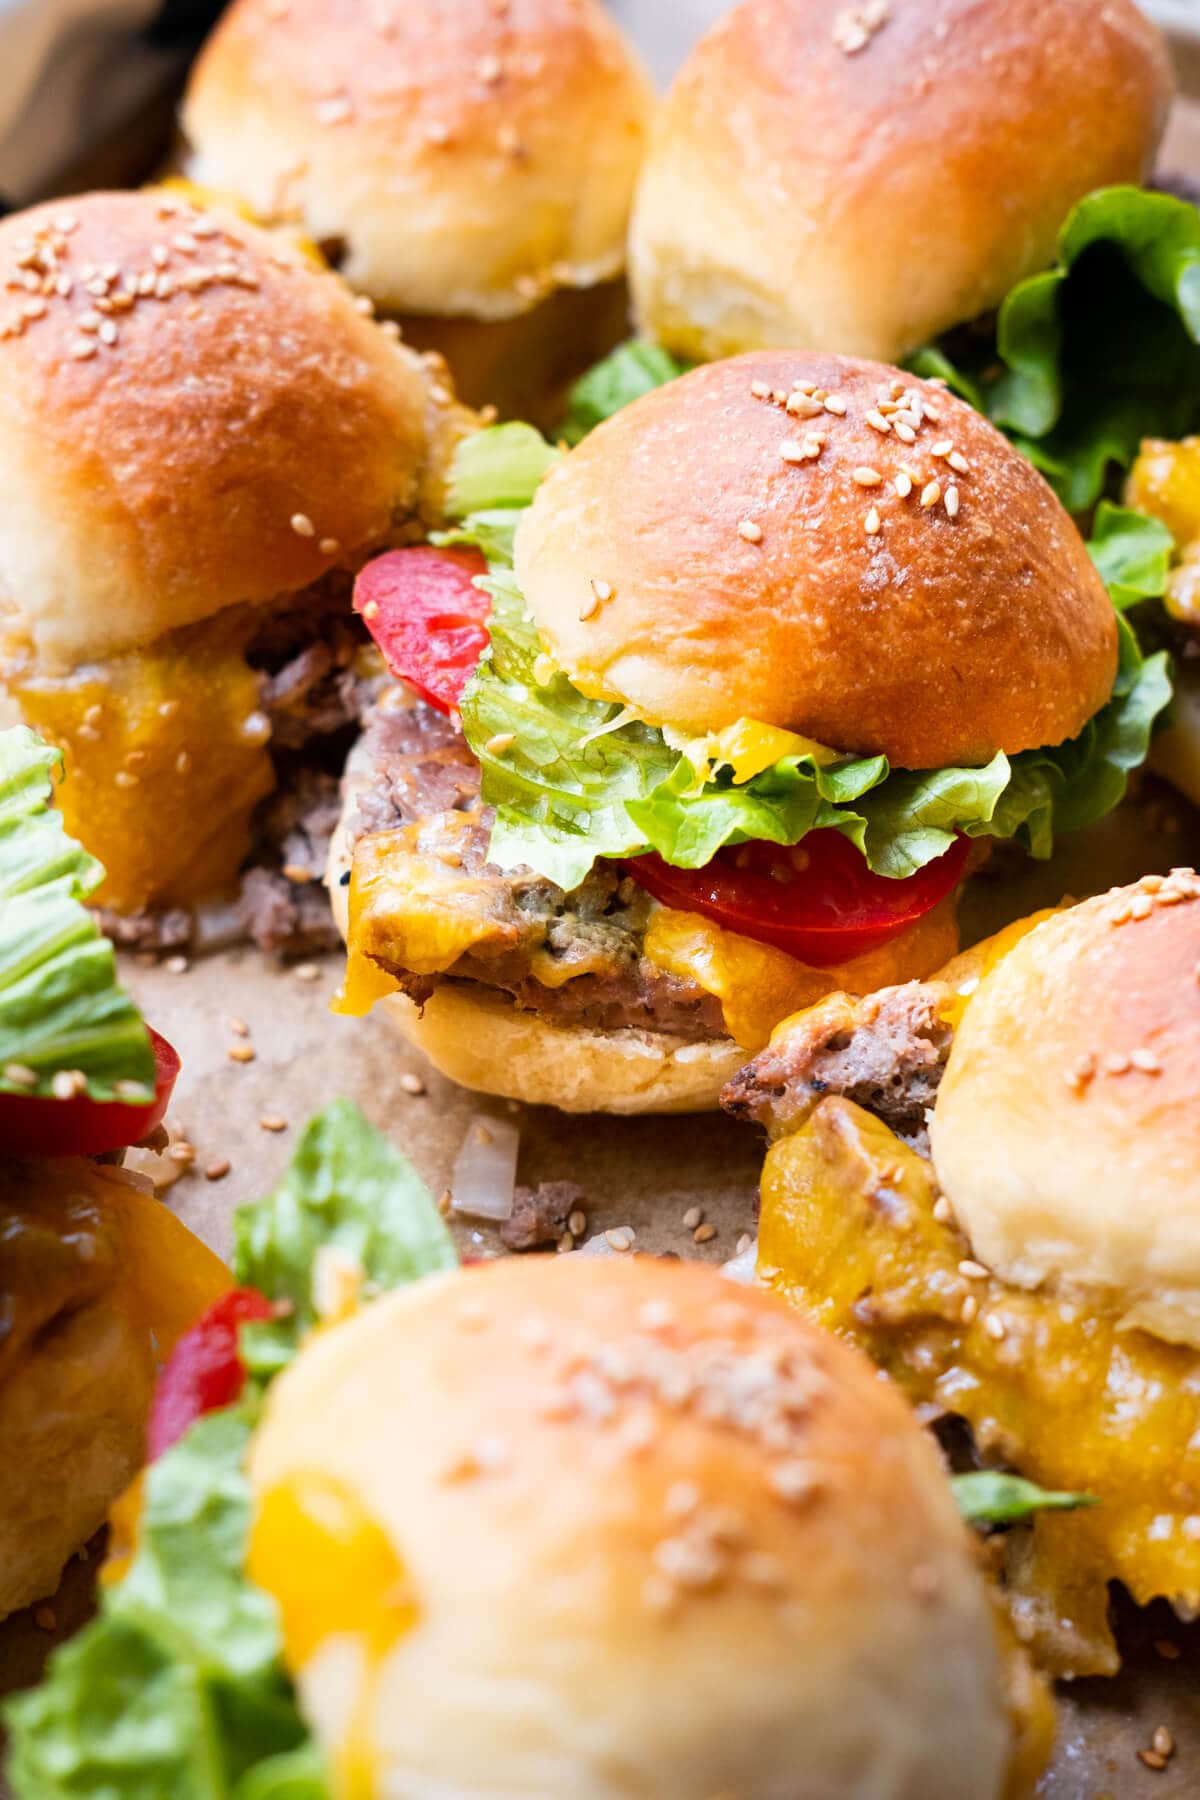 Mini sliders with cheese, beef patty, lettuce, and tomato slices in between.